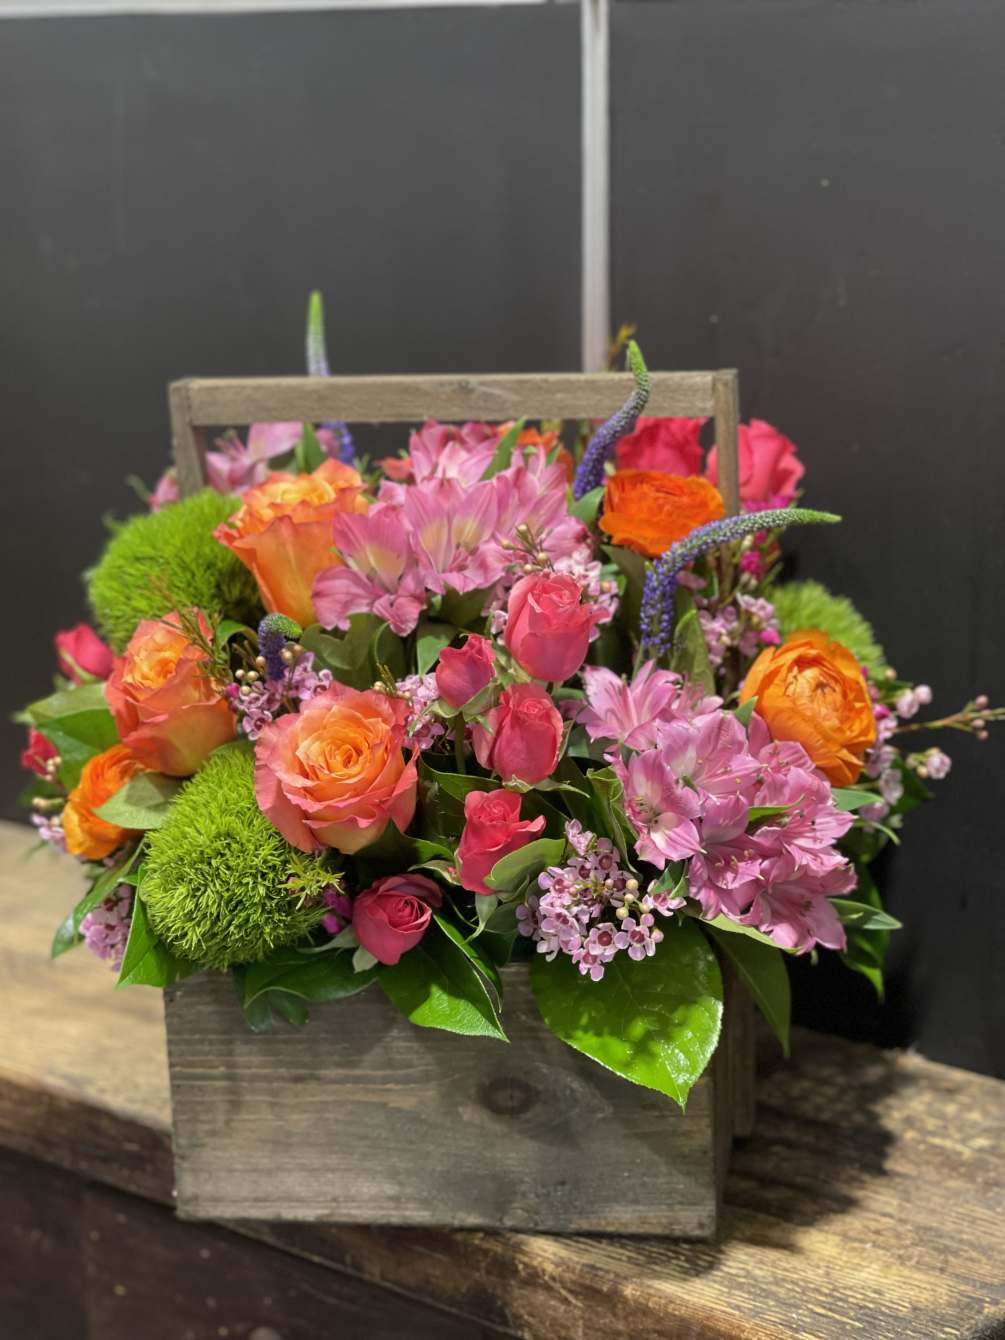 Cheerful combination of Roses, Dianthus, Spray Roses, Anemone,Veronica and other seasonal flowers